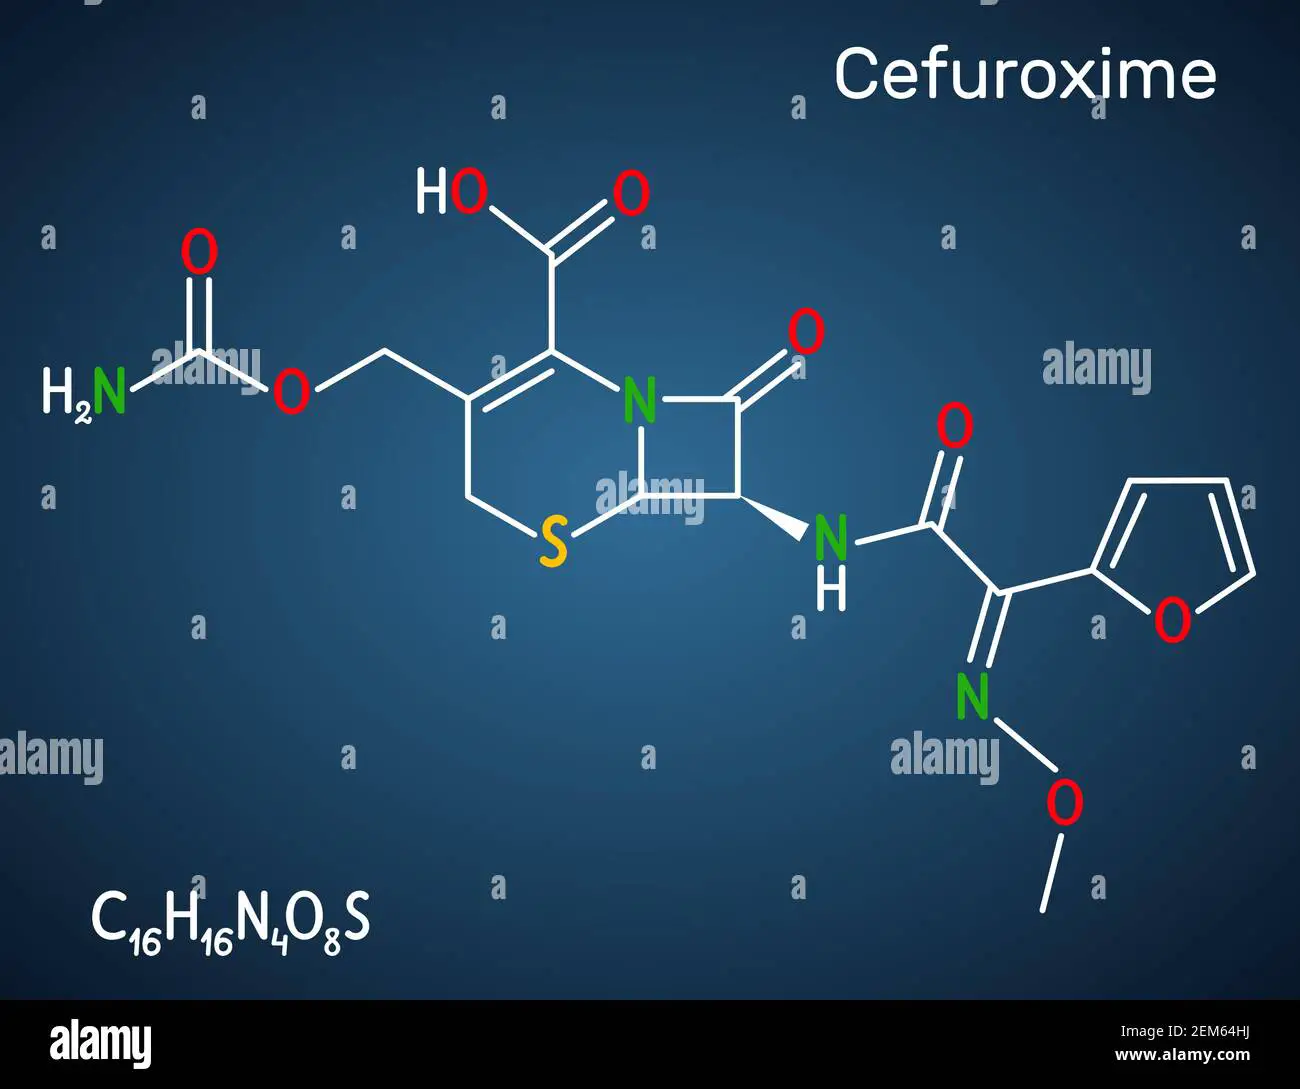 Cefuroxime molecule. It is second